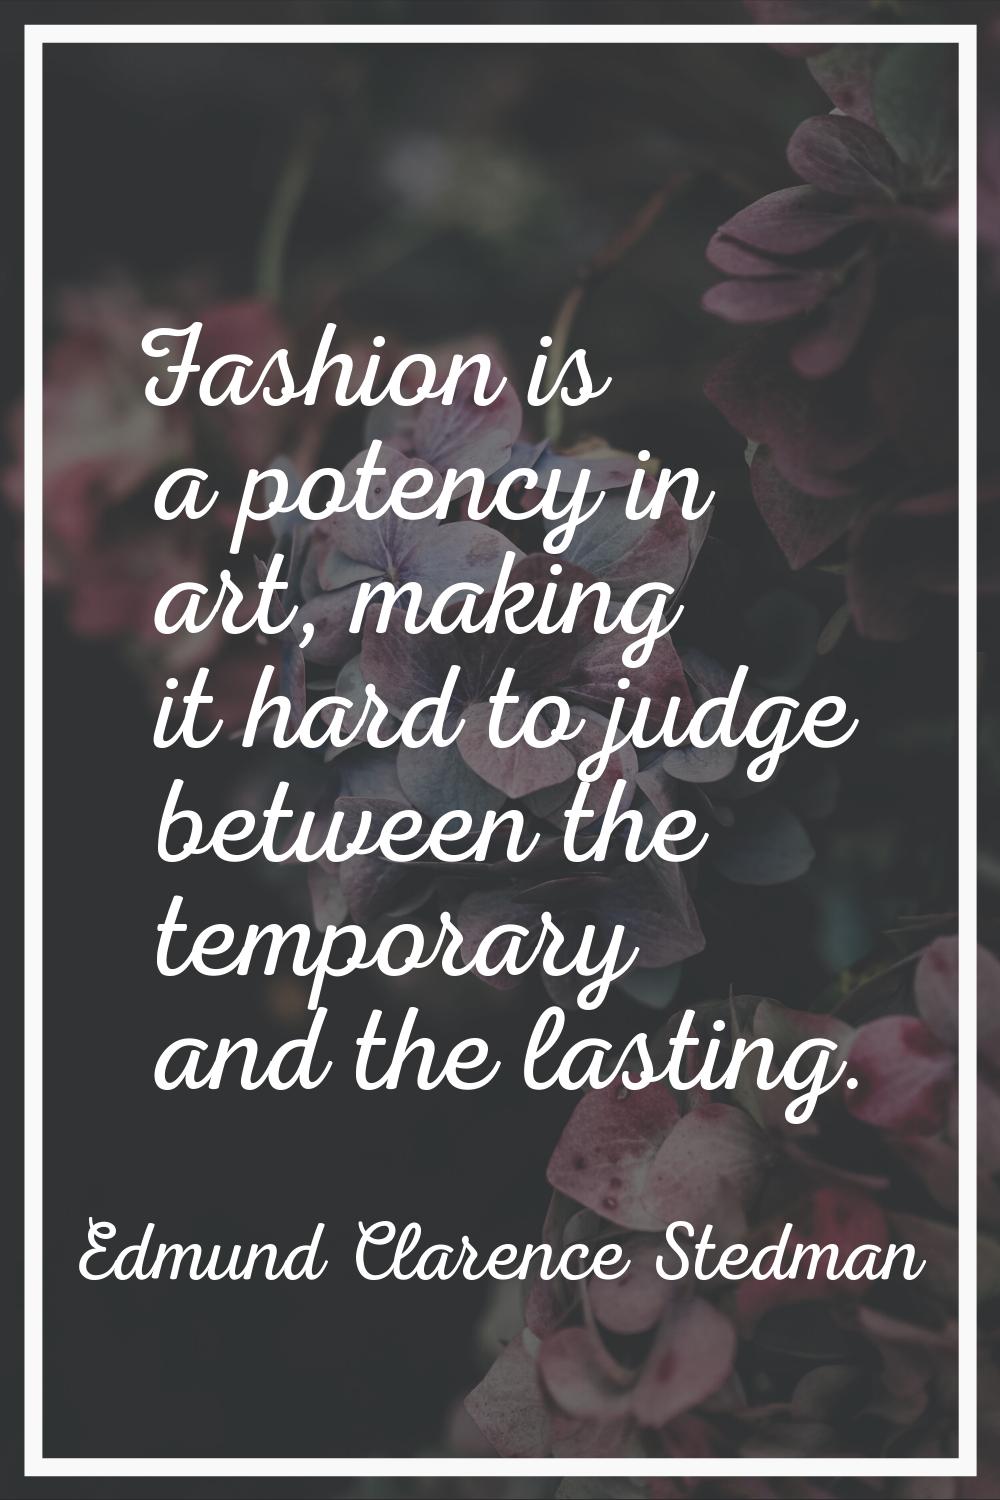 Fashion is a potency in art, making it hard to judge between the temporary and the lasting.